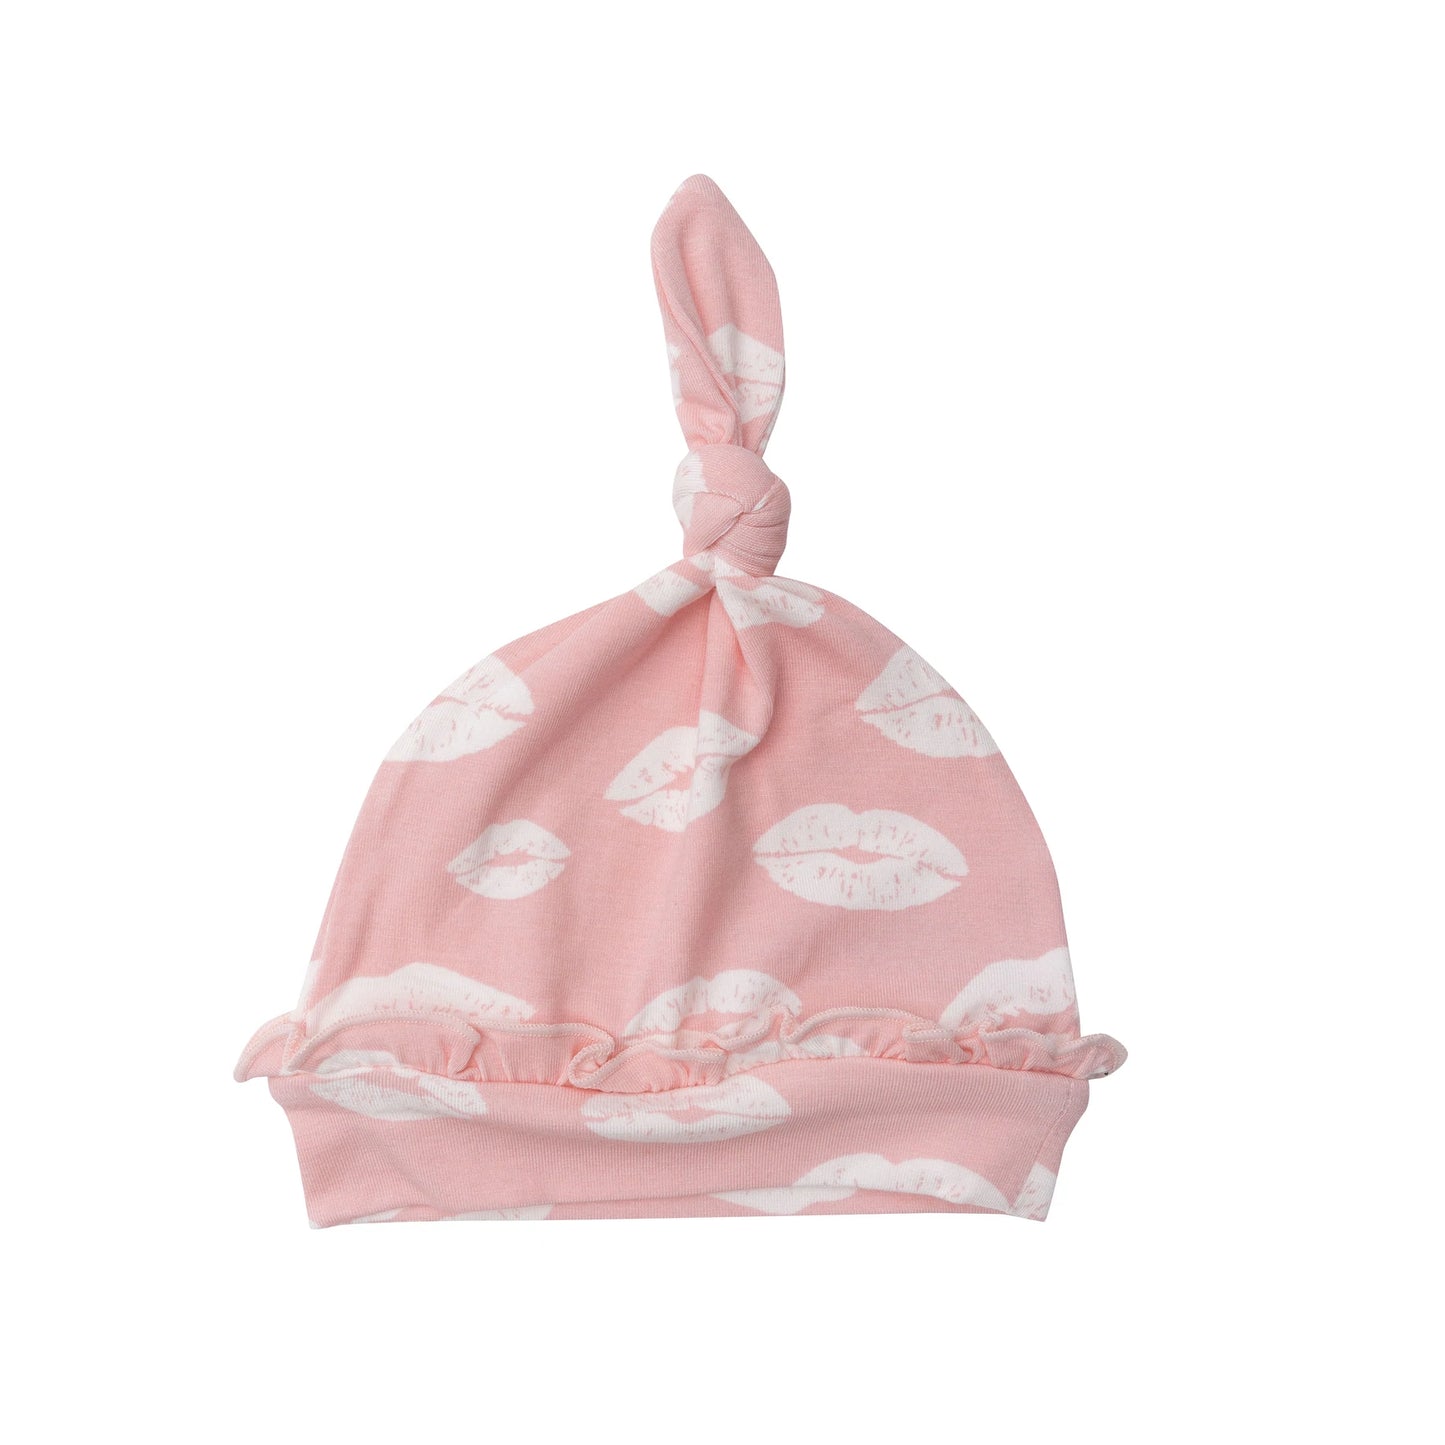 Knotted Ruffle Hat in Pink Kisses  - Doodlebug's Children's Boutique